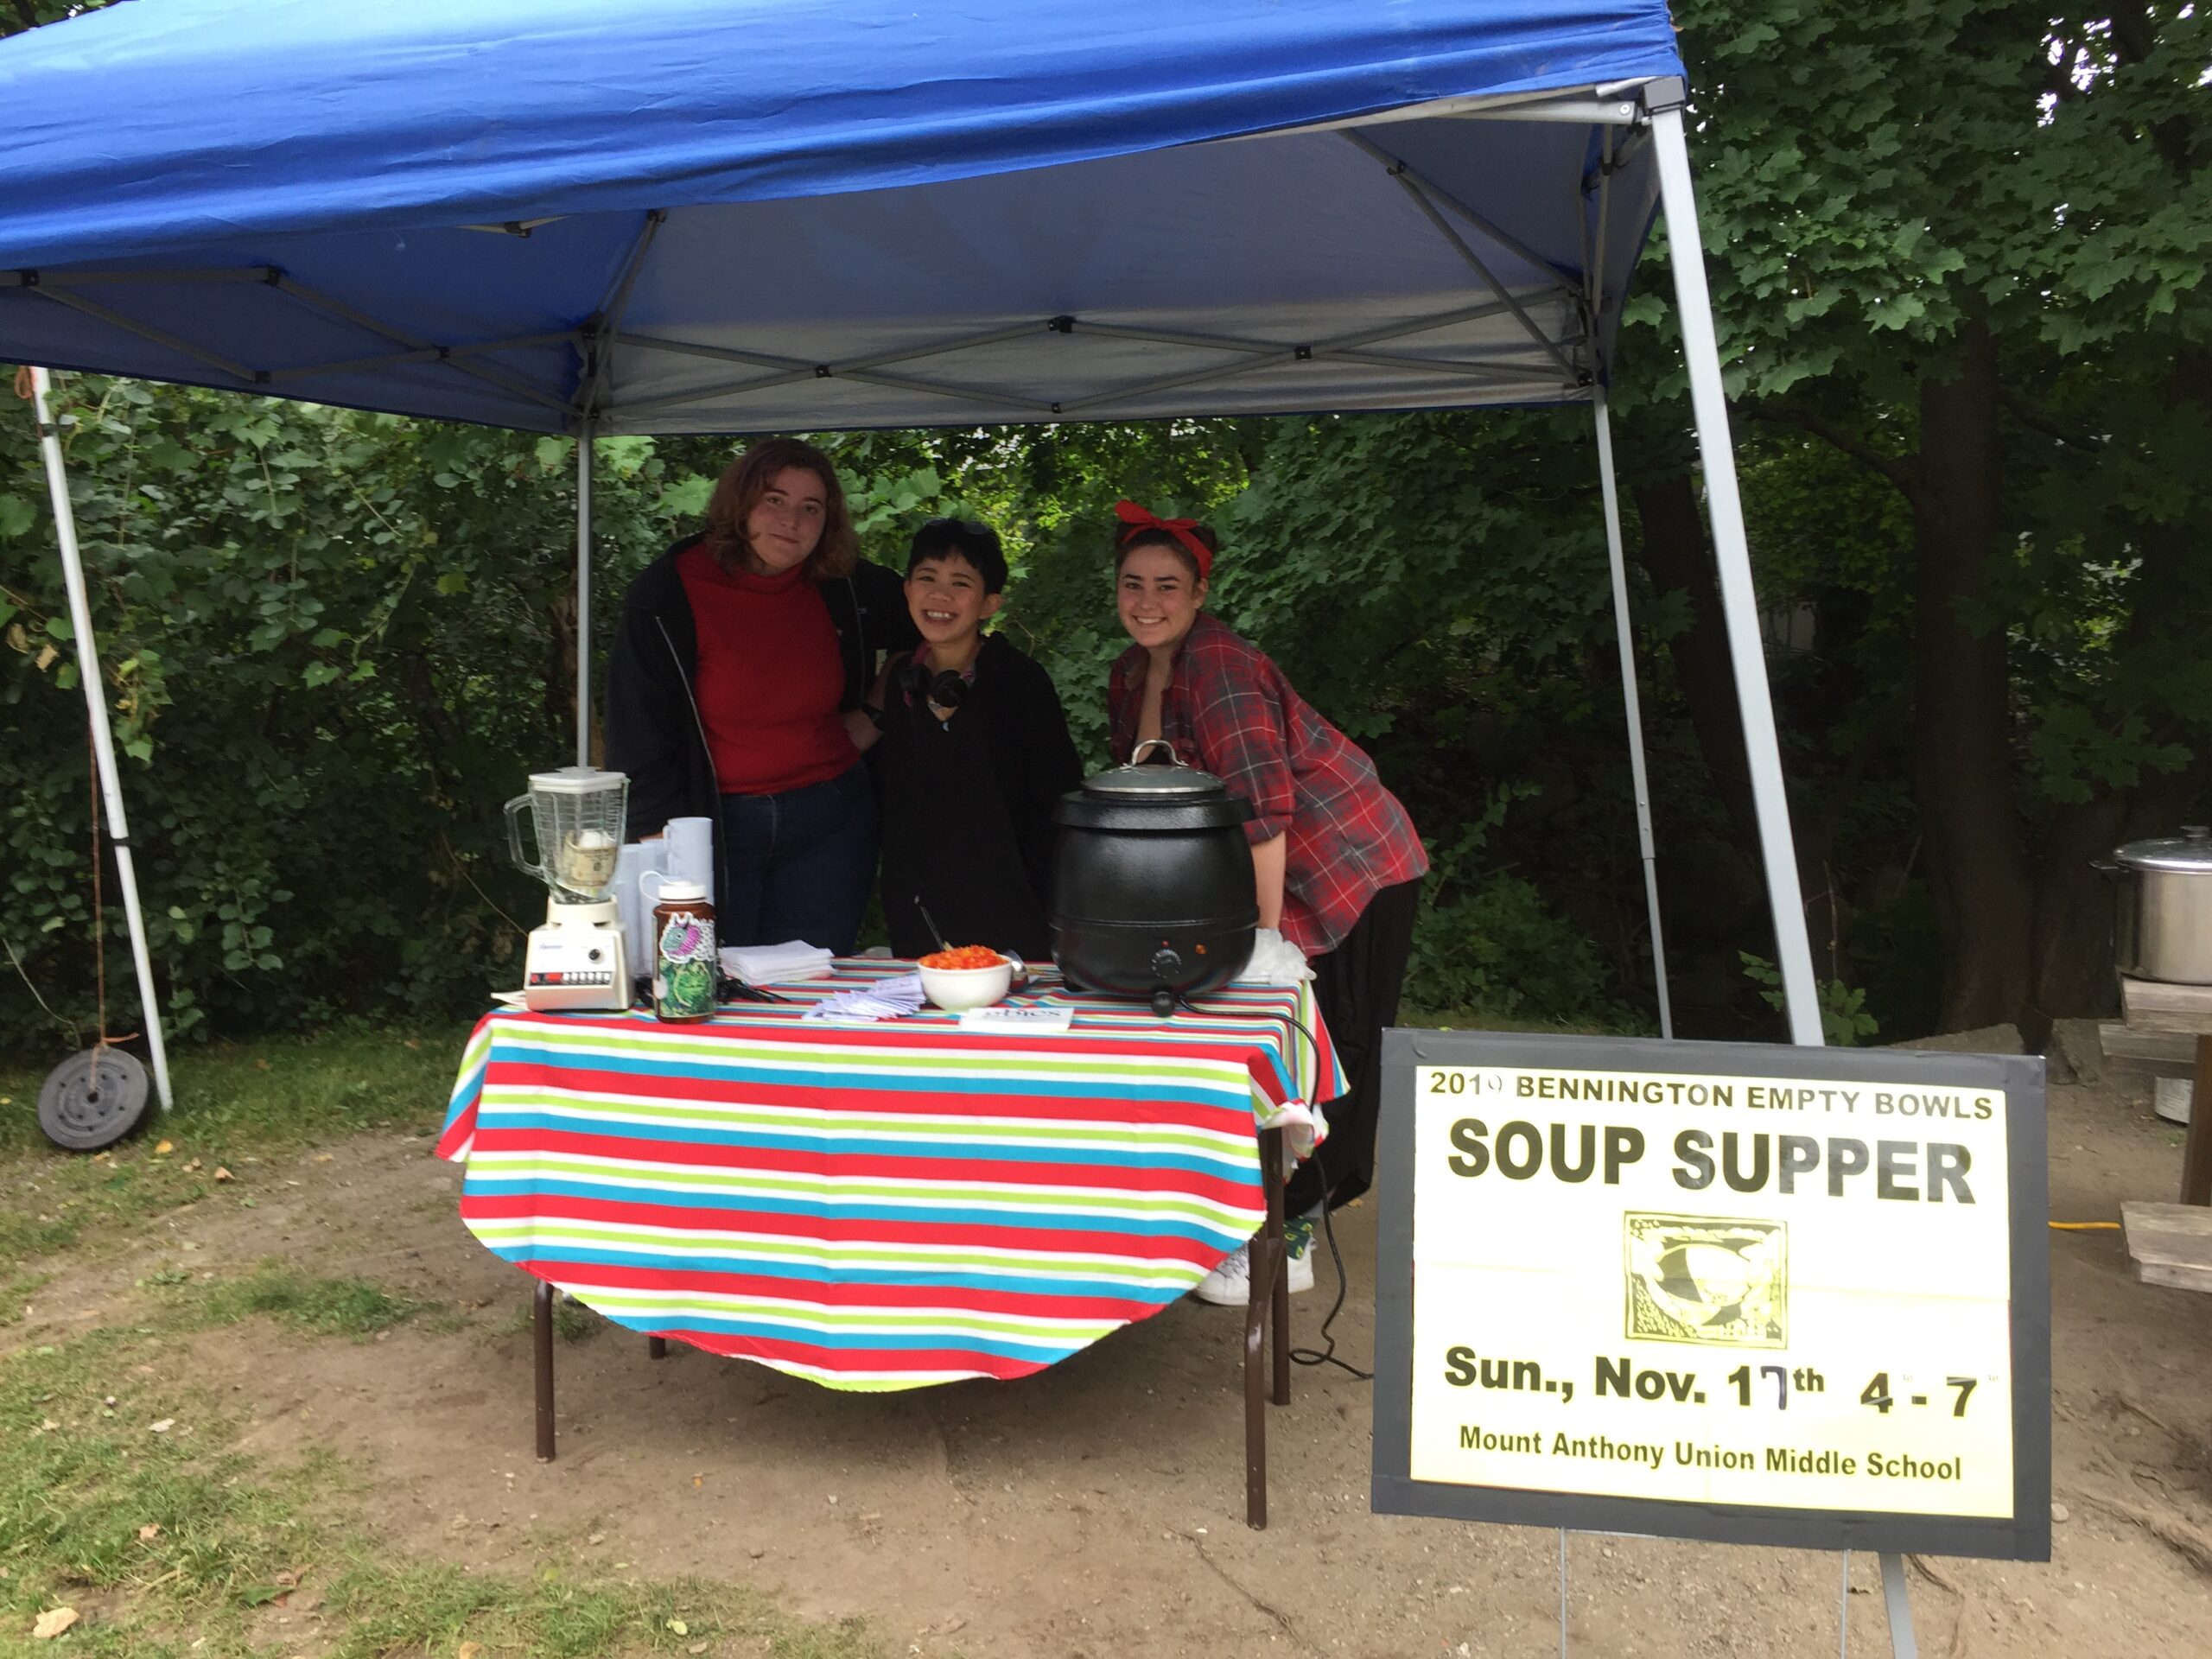 Three young people stand behind a table under a pop-up tent smiling and serving soup with a sign for Bennington Empty Bowls Soup Supper